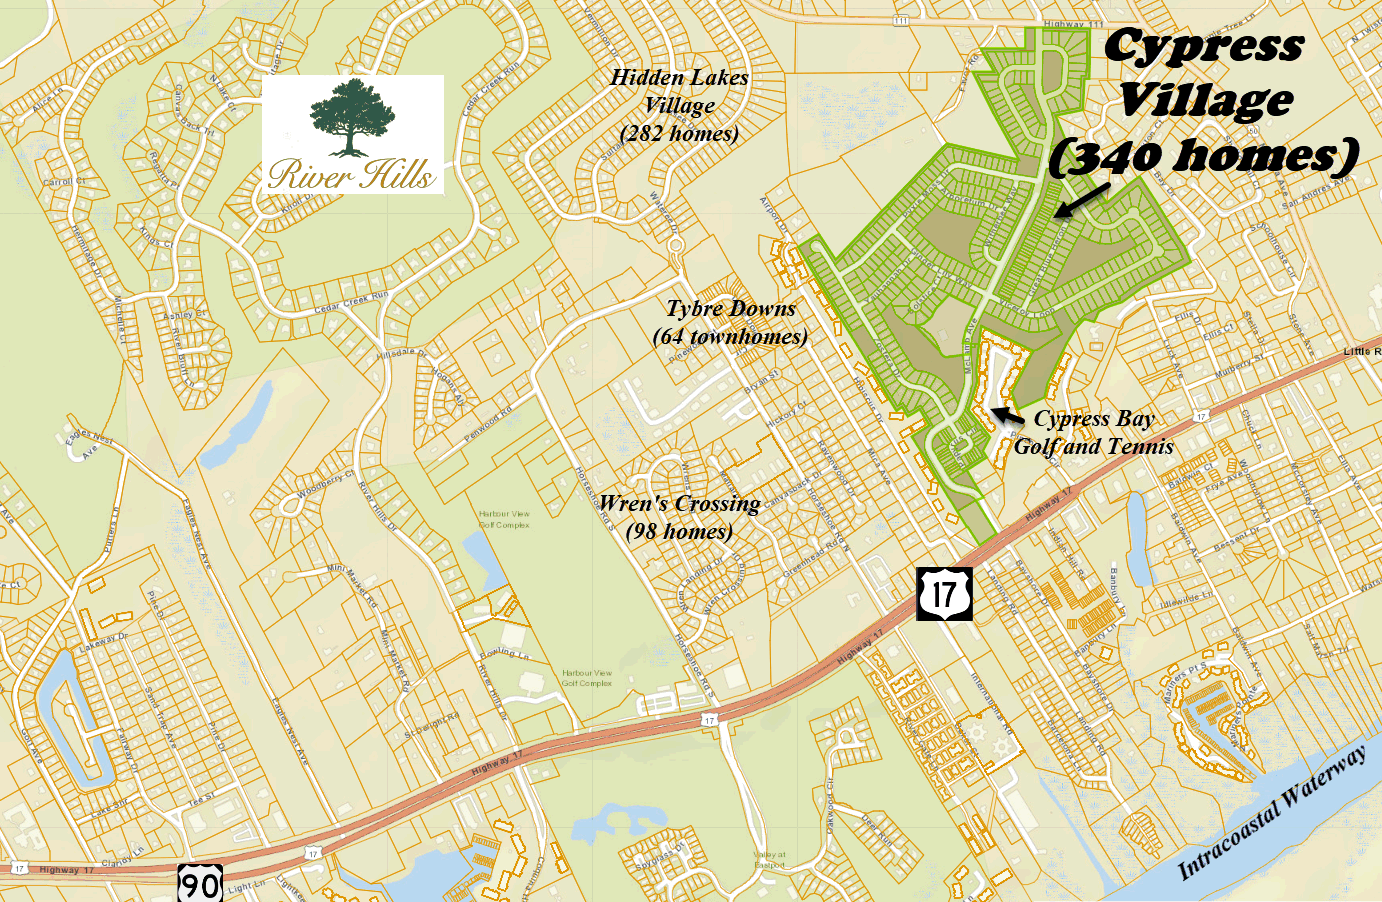 Cypress Village new home community in Little River